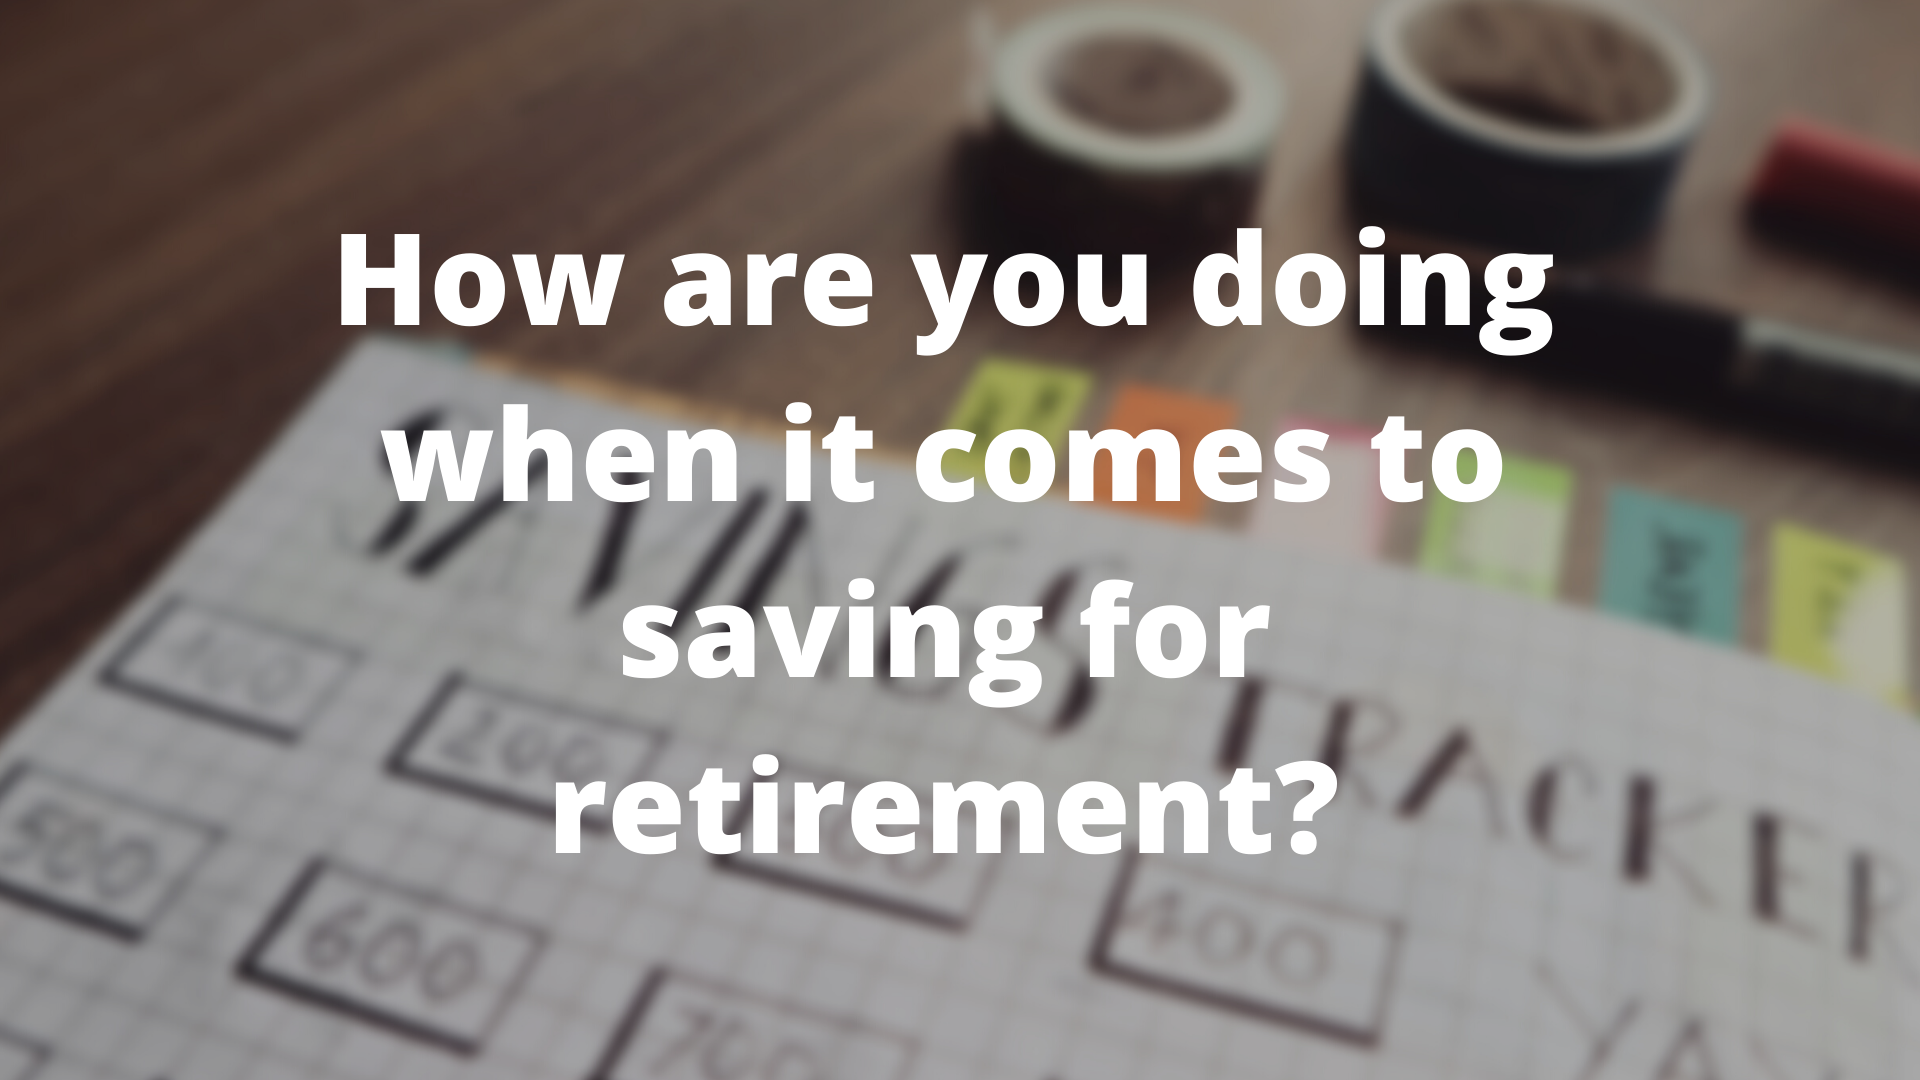 How Does Your Retirement Savings Compare to Other People Your Age?